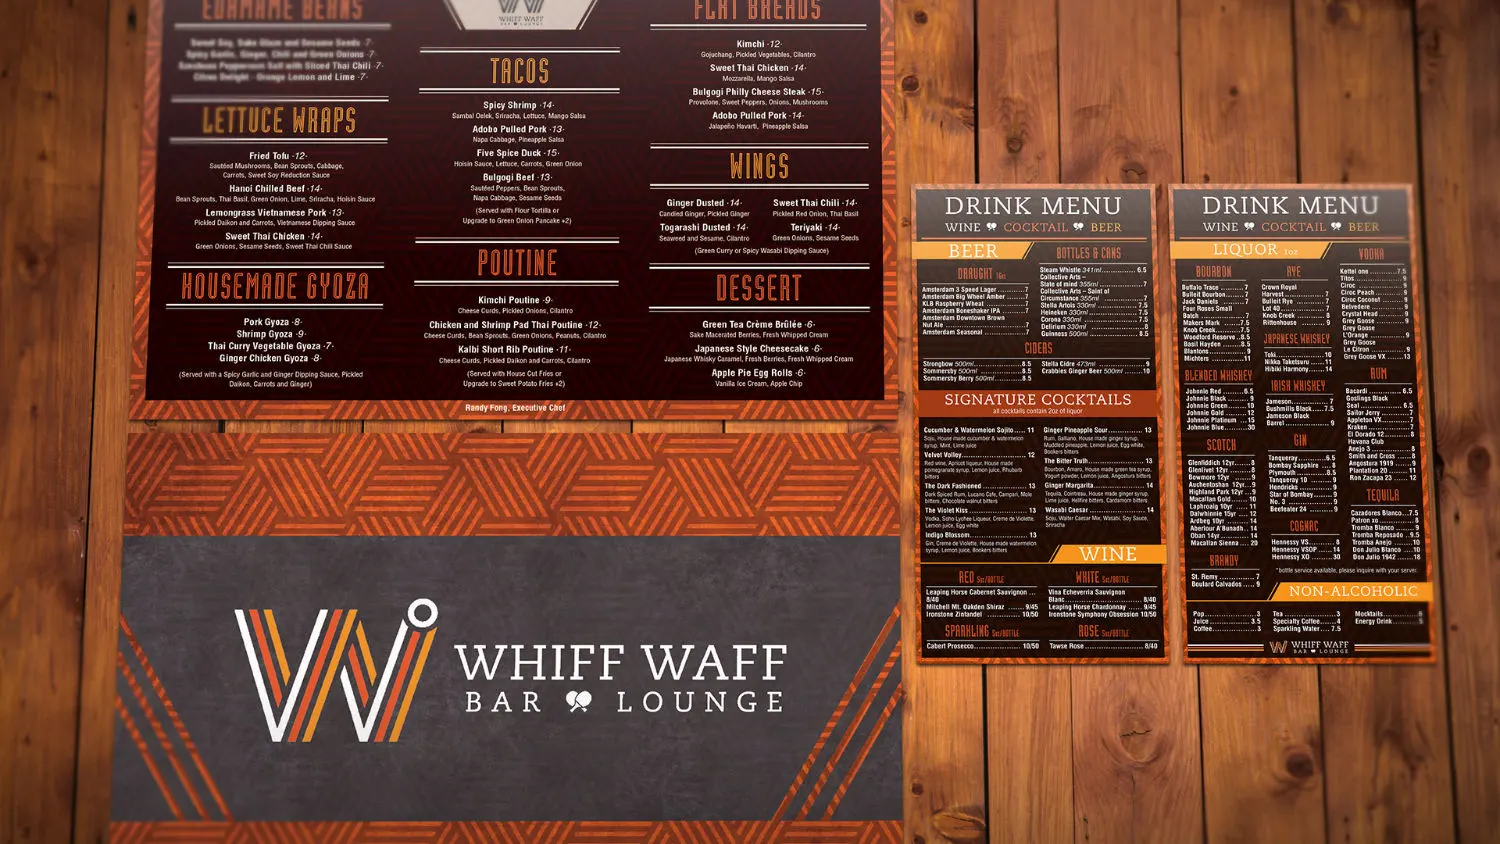 Graphic design project for Whiff Waff Bar & Lounge. Designed menus with the brand identity of Whiff Waff